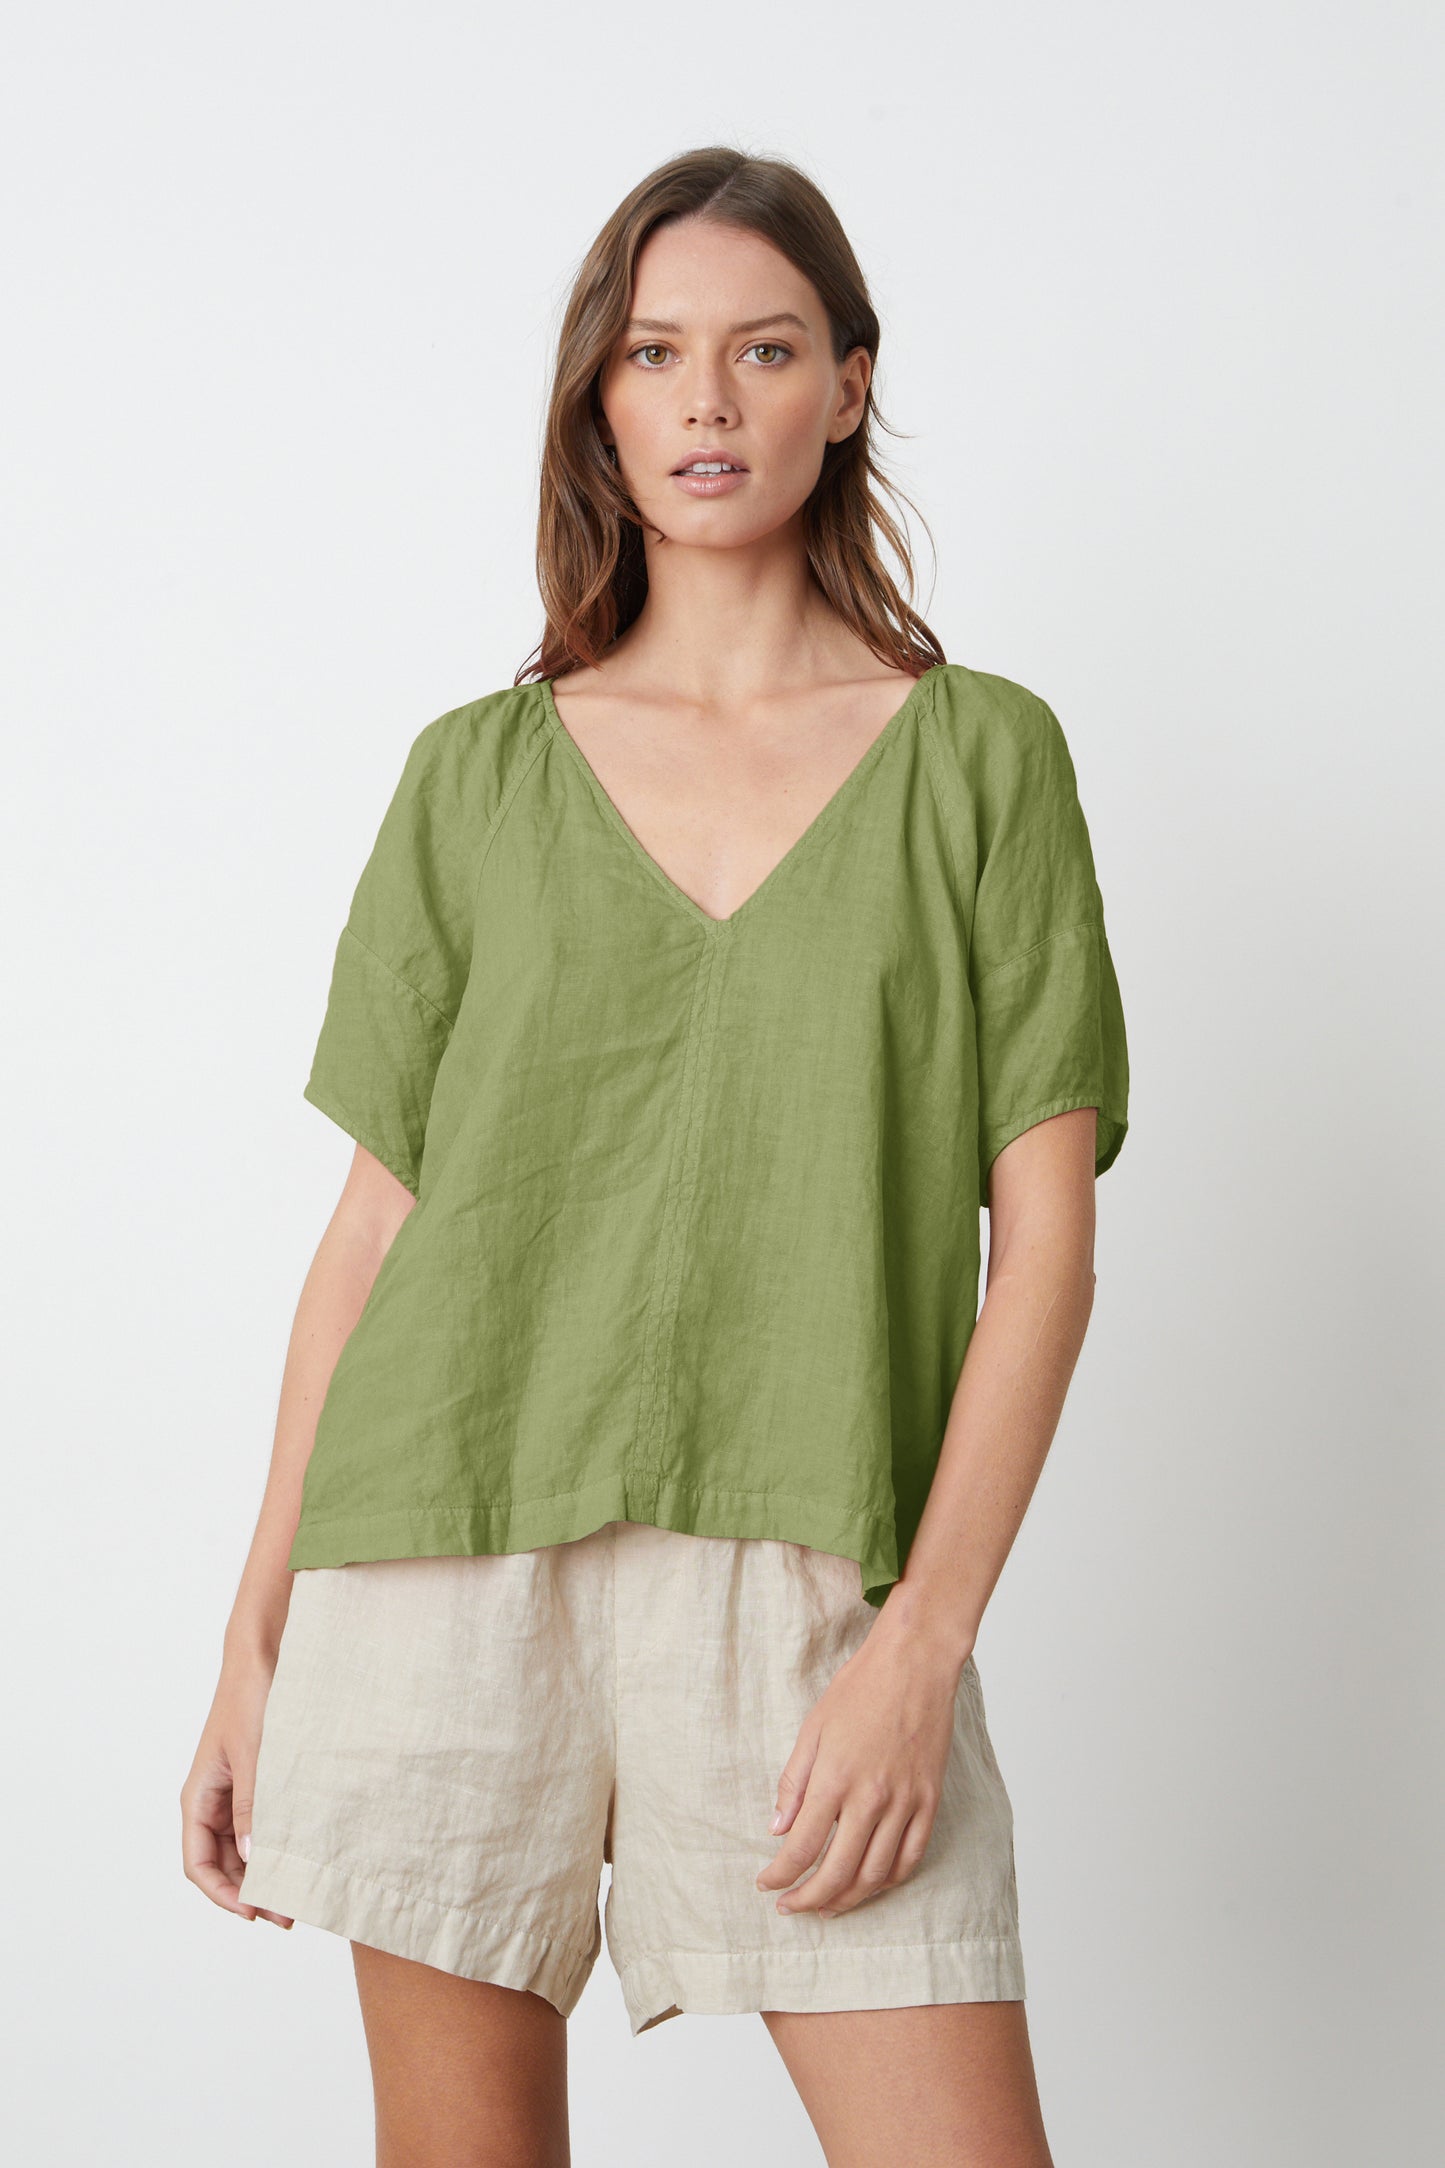 A woman wearing a basil green CALLIN PUFF SLEEVE LINEN TOP by Velvet by Graham & Spencer and Tammy shorts.-26577402233025